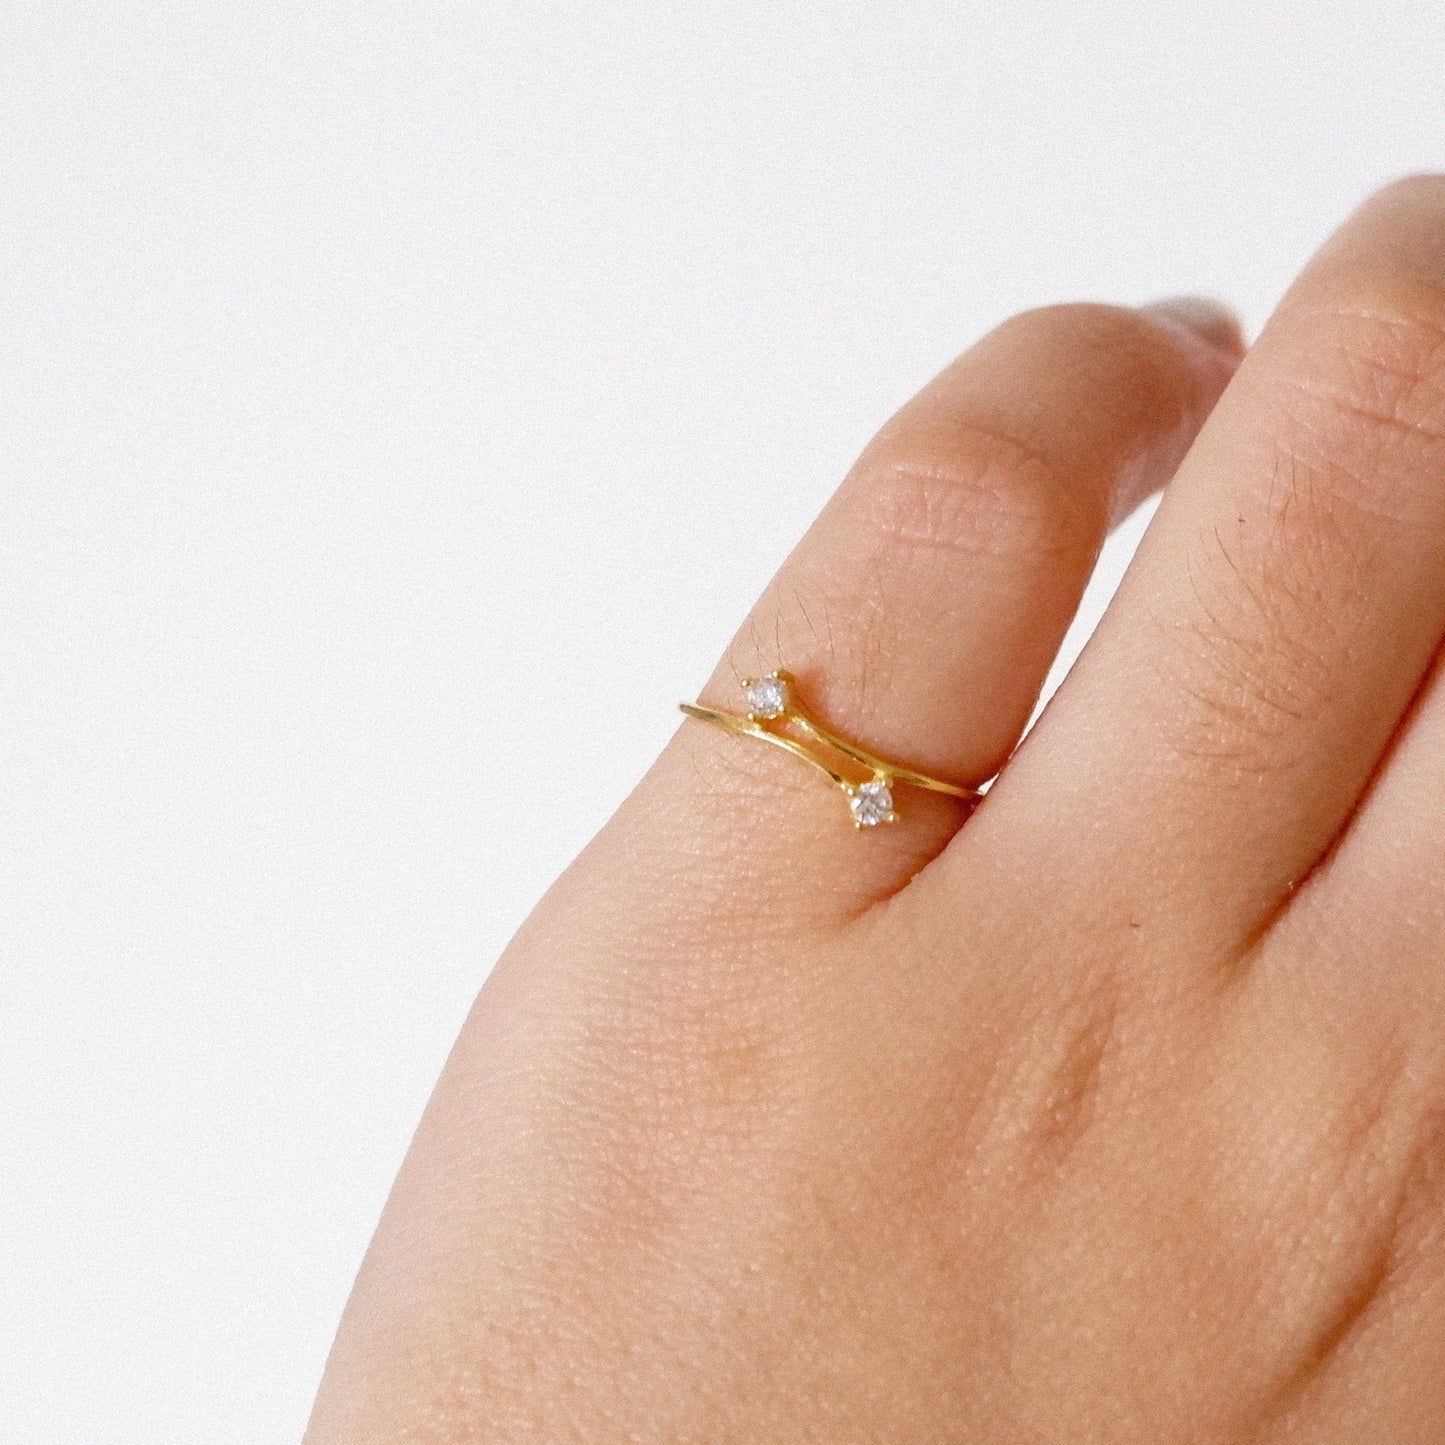 The Bloom Diamond Ring in Solid Gold